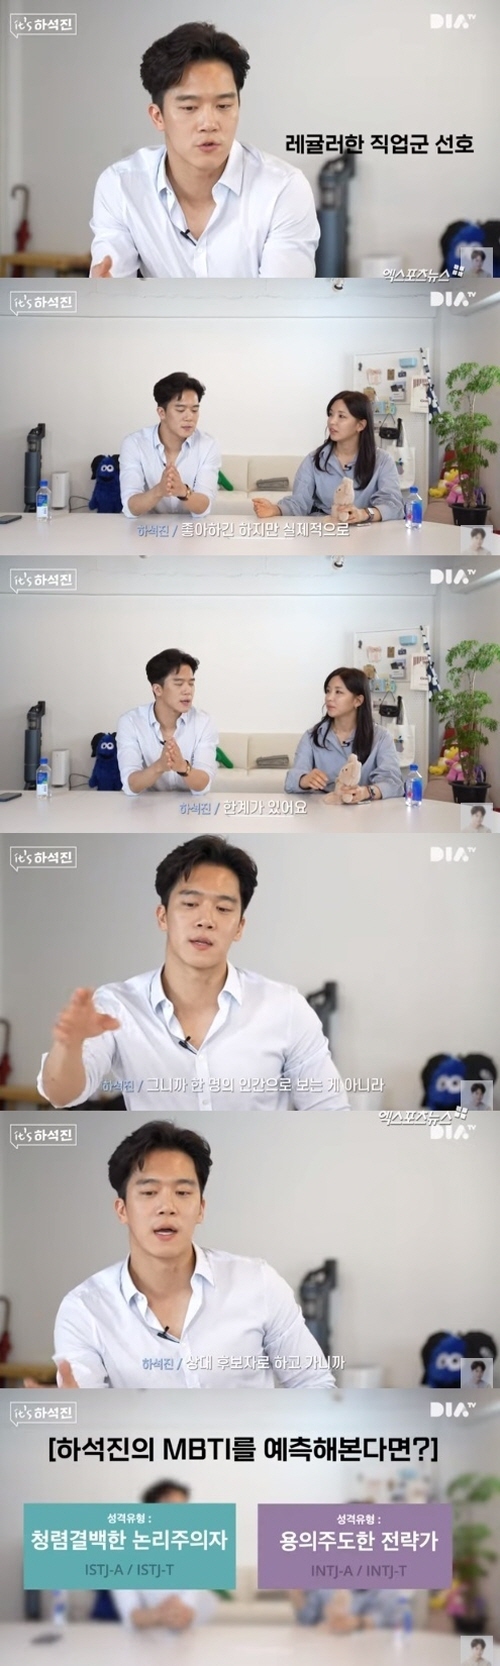 Actor Ha Seok-jin reveals Love, marriageOn the 18th, Ha Seok-jin YouTube channel said, At this time... I talked about love, love, parting, and marriage.(With housewife, talkative girl, love daring, blind date sledding) the video has been uploaded.The home appliance housewife said: I see it in 16 years; there was a yoga academy near Hongdae in 2005 and I took classes in the same class.There were about ten women and a man alone, but he was not absent. He was a celebrity.I met one more time, and in 2005, I was with a woman. I came to a bedroom-like cafe in Hongdae with a woman, remember the women who were with me at the time, there were two, the home appliance housewife added.Ha Seok-jin was left with a laugh in embarrassment.Ha Seok-jin said, Todays theme is why Ha Seok-jin does not even come out of marriage to eat that Age.You can see it roughly, but it remains, and it came out of Namdae (opened by Hanyang University); four out of 300 were women, he said.I think it was popular because I did not live a different life from the normal thinking college, he said. I was not inclined to know a lot of women around me.Asked if he had a marriage will, Ha Seok-jin, who was in a misfortune this year, said: I want to marriage; I didnt really do it, but I thought about it from the previous year.I feel that the more time I have been alone, the more negative parts I feel, he said. What do you think when I see a man in this Age who lives with a good living?The housewife said, I am rich and scared, and I think why women are leaving me alone.Ha Seok-jin asked, Is not there a defect in the normal bachelor until then? He said, I am trying hard, but I saw a lot of girls yesterday.After parting, I can not eat rice, go to the hospital, go to the hospital, get counseling, and I want to hear if he has recovered, but he has marriage with him. The housewife speculated, Those who usually try to reunite there are those who are not good at it. You have recently broken up, yes.Ha Seok-jin said, I have a pain of separation. I did not have one person, so each pain is different.Some people are less sad and some people are sick and some people are sick, but I think that if I meet someone who is sick and dying again, I can marriage. I always talk to my friends. I do not want to go or go, I always say I should go.I have gone to the place with someone who has prepared it and done it all in various ways, and the person who has done the best in the relationship is only the number, but I should not think that I will go to the place compared to the person who seems to be going to Korea until 45 or 50 years old. Ideal also mentioned: There seems to be a different element to associate marriage with ideal; I prefer taller than small; I like dryer than Glamour.I am more introverted than I thought. MBTI would be I. E extroverts are good. I like traveling.I tended to be able to fit in, so I thought it was vague that the other person would like to be a vocational group with regular commutes. He also told me about his natural encounters and frank thoughts about blind dates.I like it because it is the first, really natural meeting, but there is a real limit. I am reluctant to send a picture, but I am not exposed.She has a lot to search for, but I have to know something. Its hard to meet with a blind date.I do not already assume my opponent as reason and see it as a human being, but as a candidate for Love, I can see only the element of kale.A natural meeting is a chat, a drink, or a comfortable meeting with the person. Sometimes he didnt say Ha Seok-jin. Hes not saying anything. Hes not asking me questions. If you have any questions, Im asking him questions.Anyway, it seems difficult to call blind date, but it seems to be the most easy. Especially in the Corona era, we can not set more than four people. As Age goes on, it becomes dull and desperate for Love. So the housewife said, I think I can do it actively.How many people would say no to Ha Seok-jins active behavior? No. Is it a bad style?Ha Seok-jin admitted it was a well-eating style and laughed around.Age is kicking, so I start to fear the guarantee that the formation of this relationship will be maintained. It is more sad because I break up than glad to meet.If youre in a relationship to break up anyway, you know what. Its probably the cause of the graveyard. Its less like giving you a heart.On the contrary, it is awkward for a woman to be active. It is not that. I respect this, and I think that I am not familiar with this.If a person who has lived a generation similar to me, this is strange. It seems to be getting more careful about any line.Photo: Ha Seok-jin YouTube